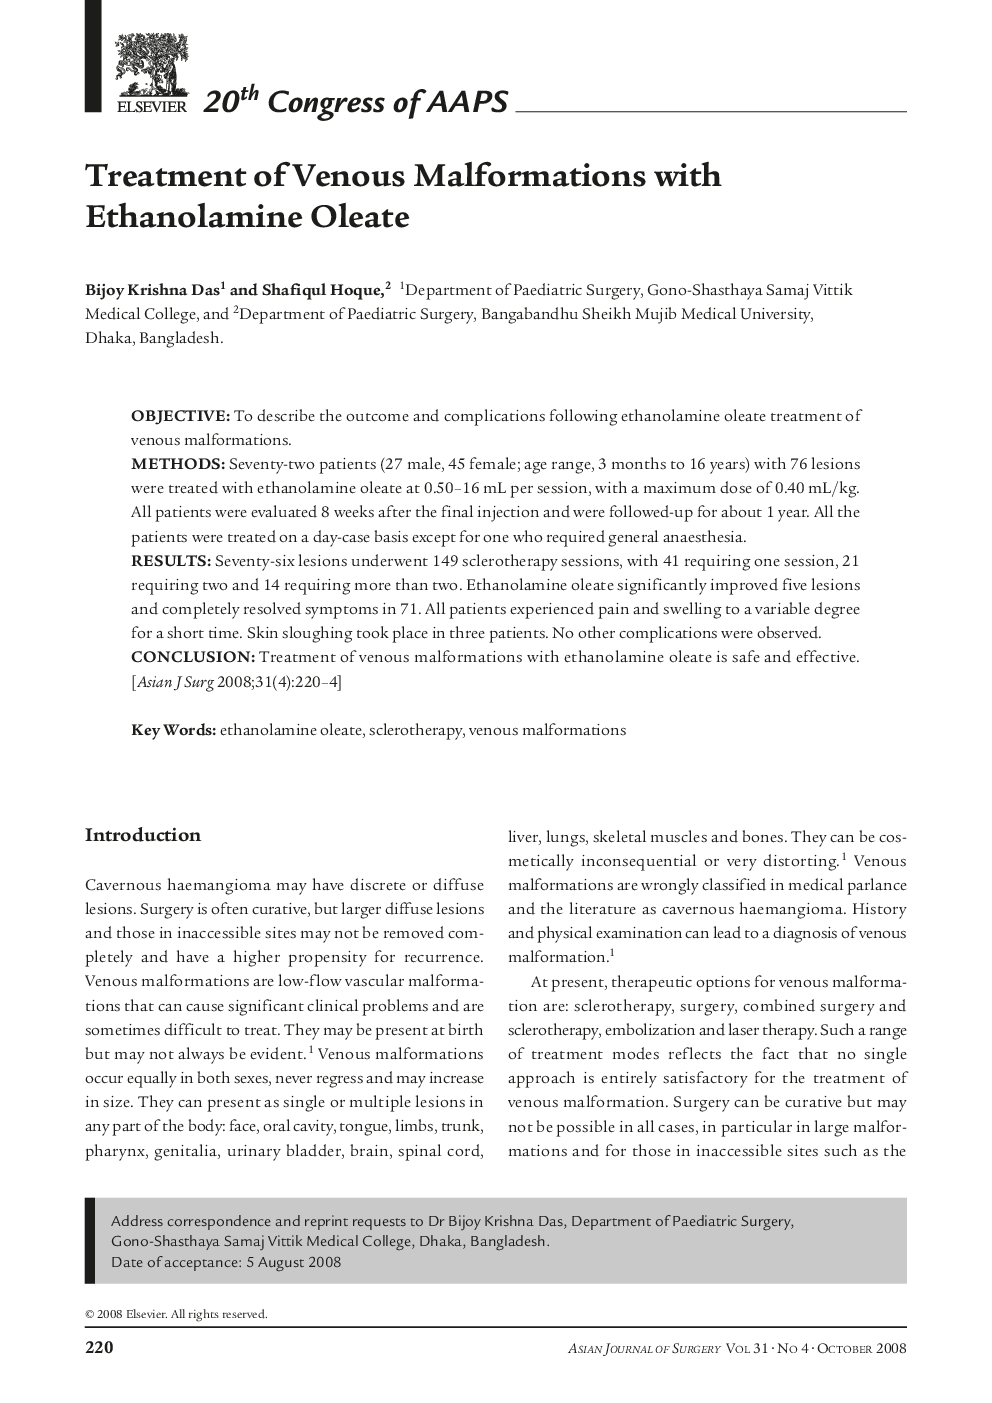 Treatment of Venous Malformations with Ethanolamine Oleate